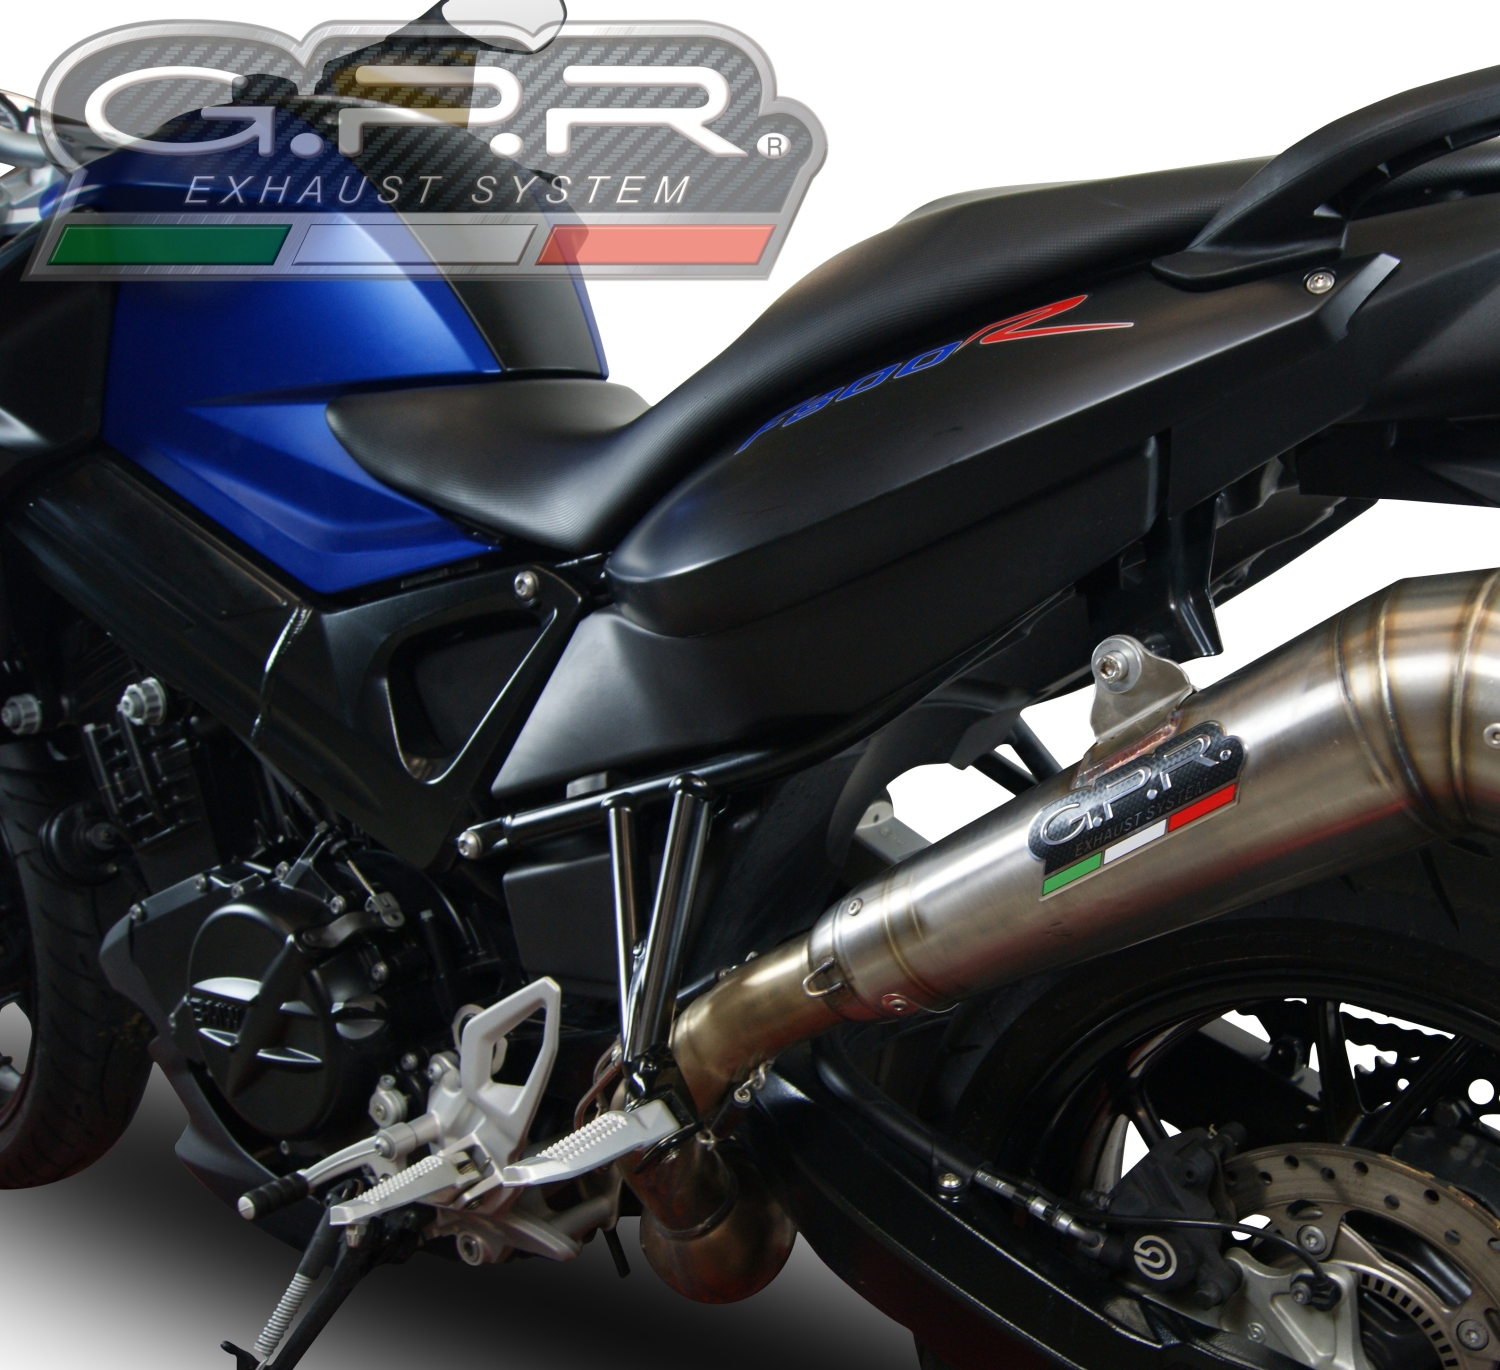 Exhaust system compatible with Bmw F 800 R 2017-2019, Powercone Evo, Homologated legal slip-on exhaust including removable db killer and link pipe 